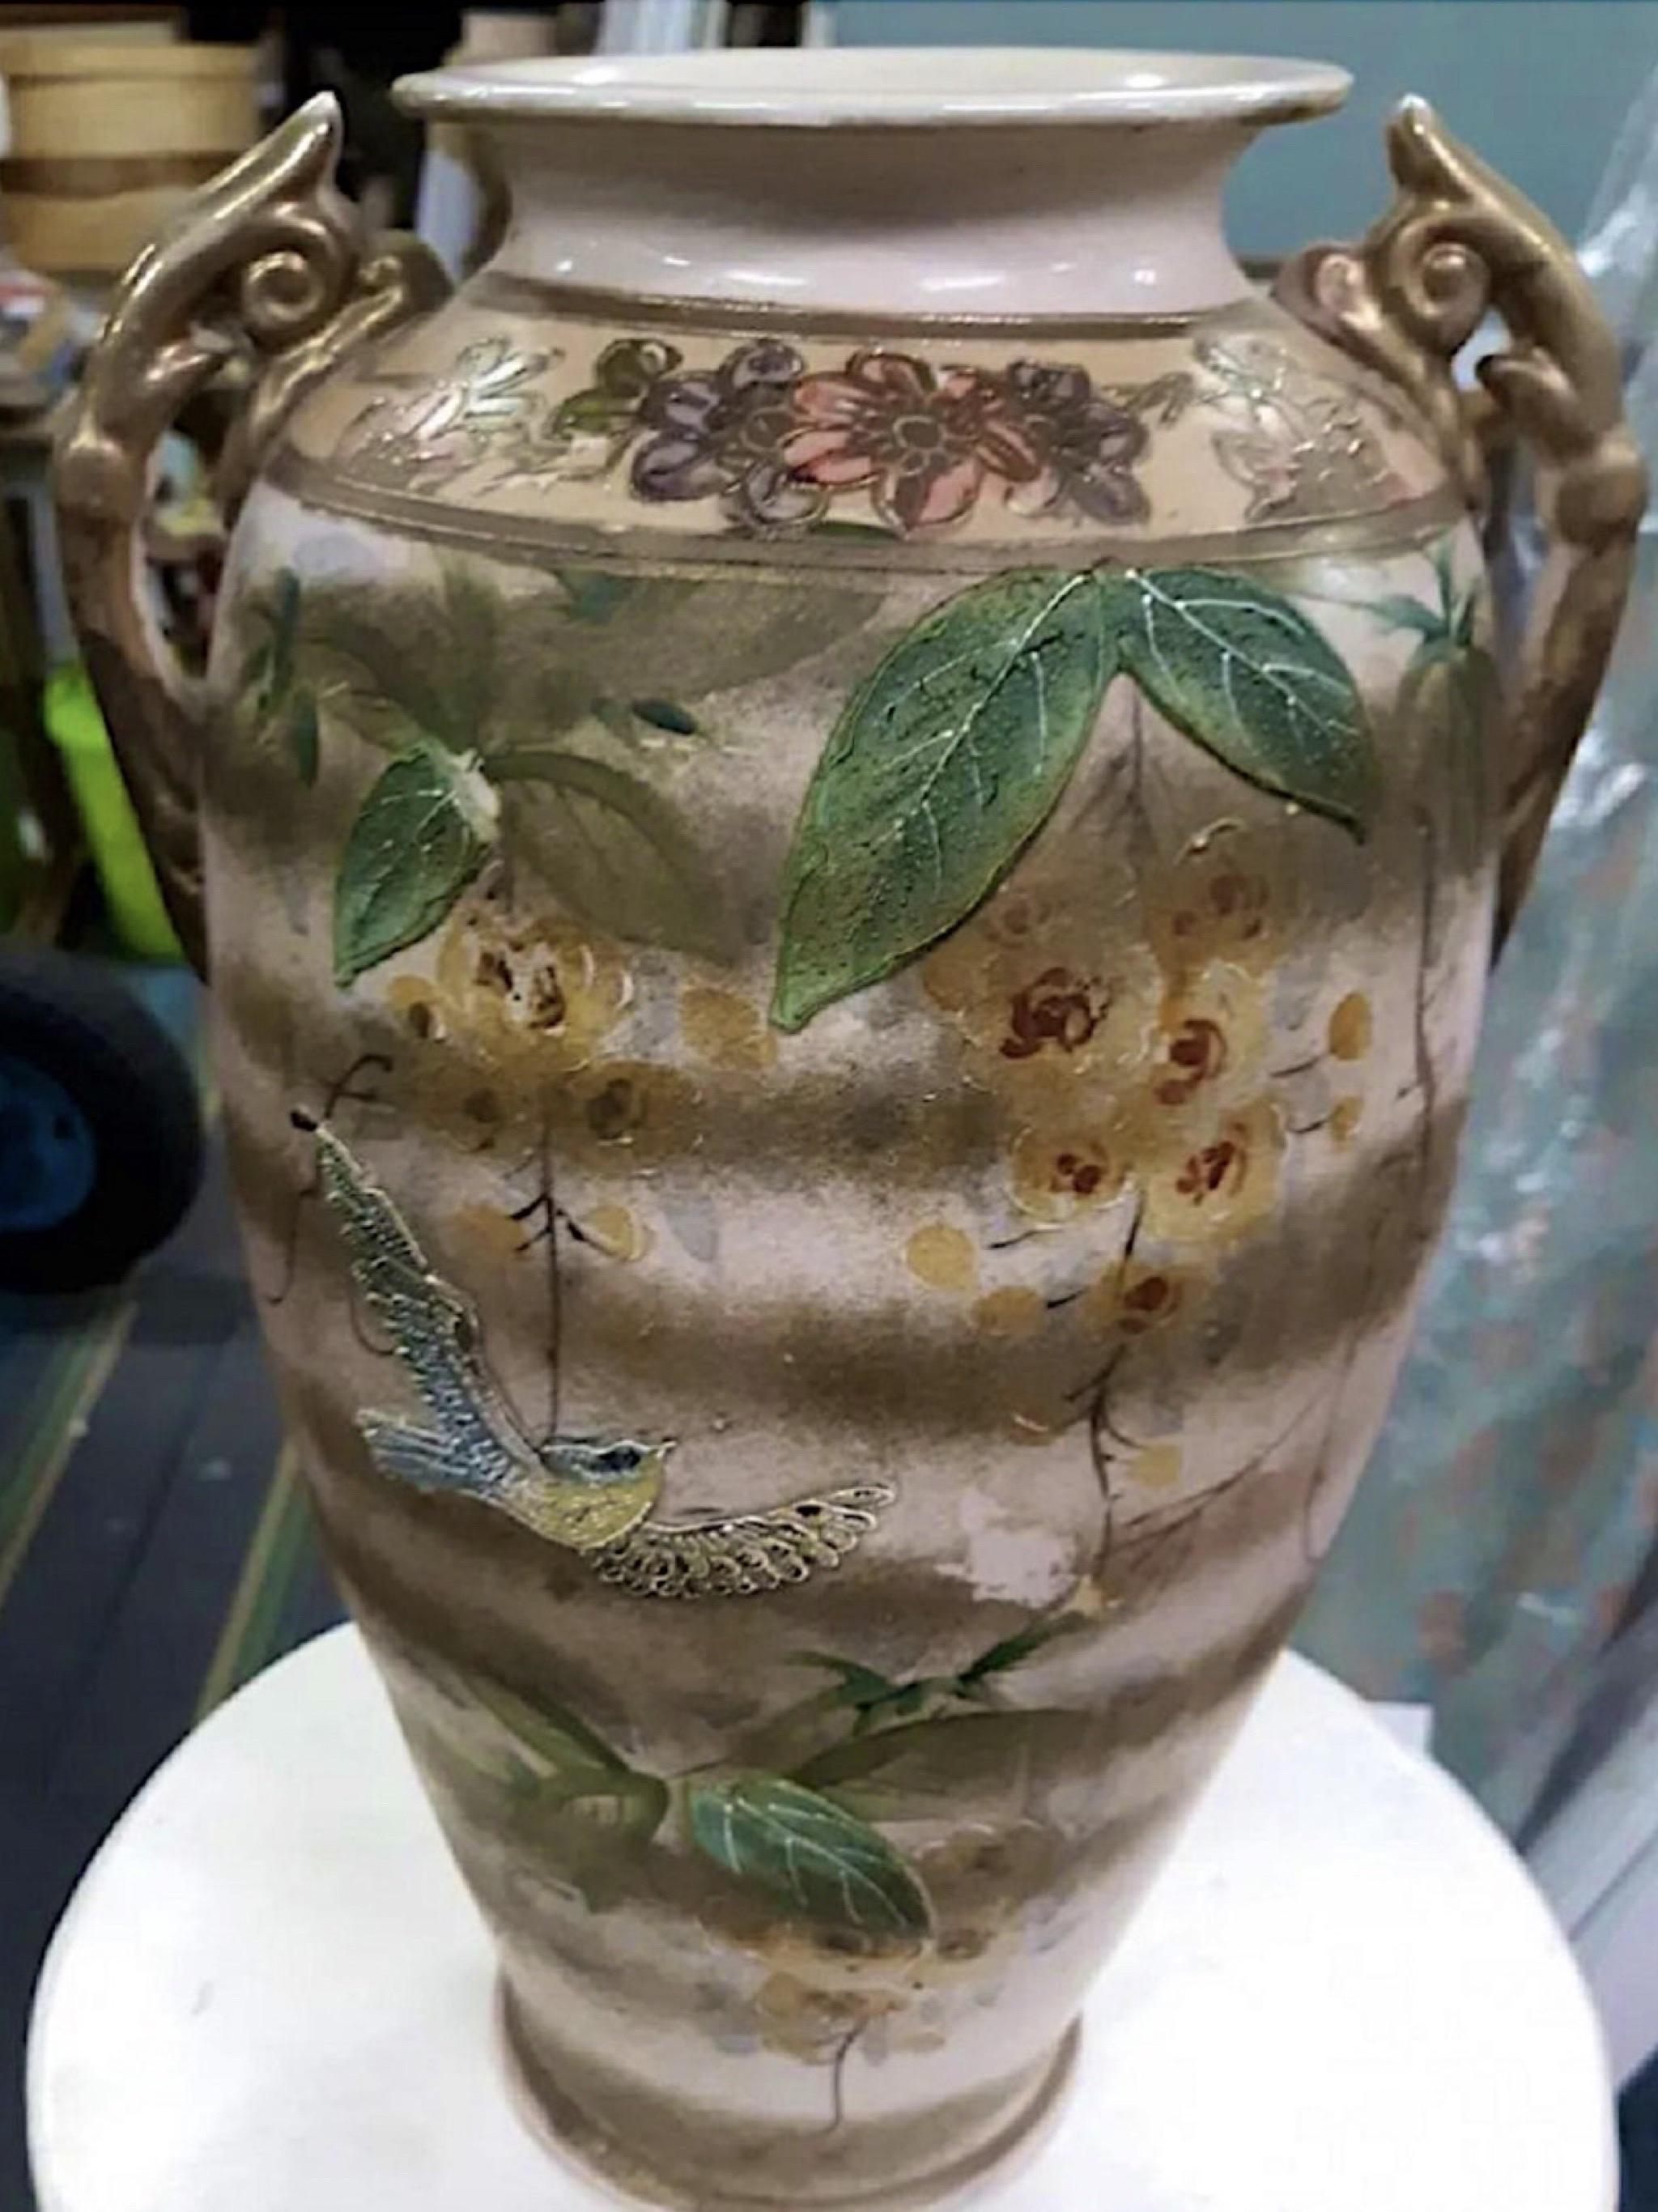 Wilmington Nc estate sale find. An outstanding rare piece of hand thrown 19th century pottery. vase moriage decoration of swallows and flowers. There is a small loss off of flower decoration and overall age expected crazing. This beautiful vase has